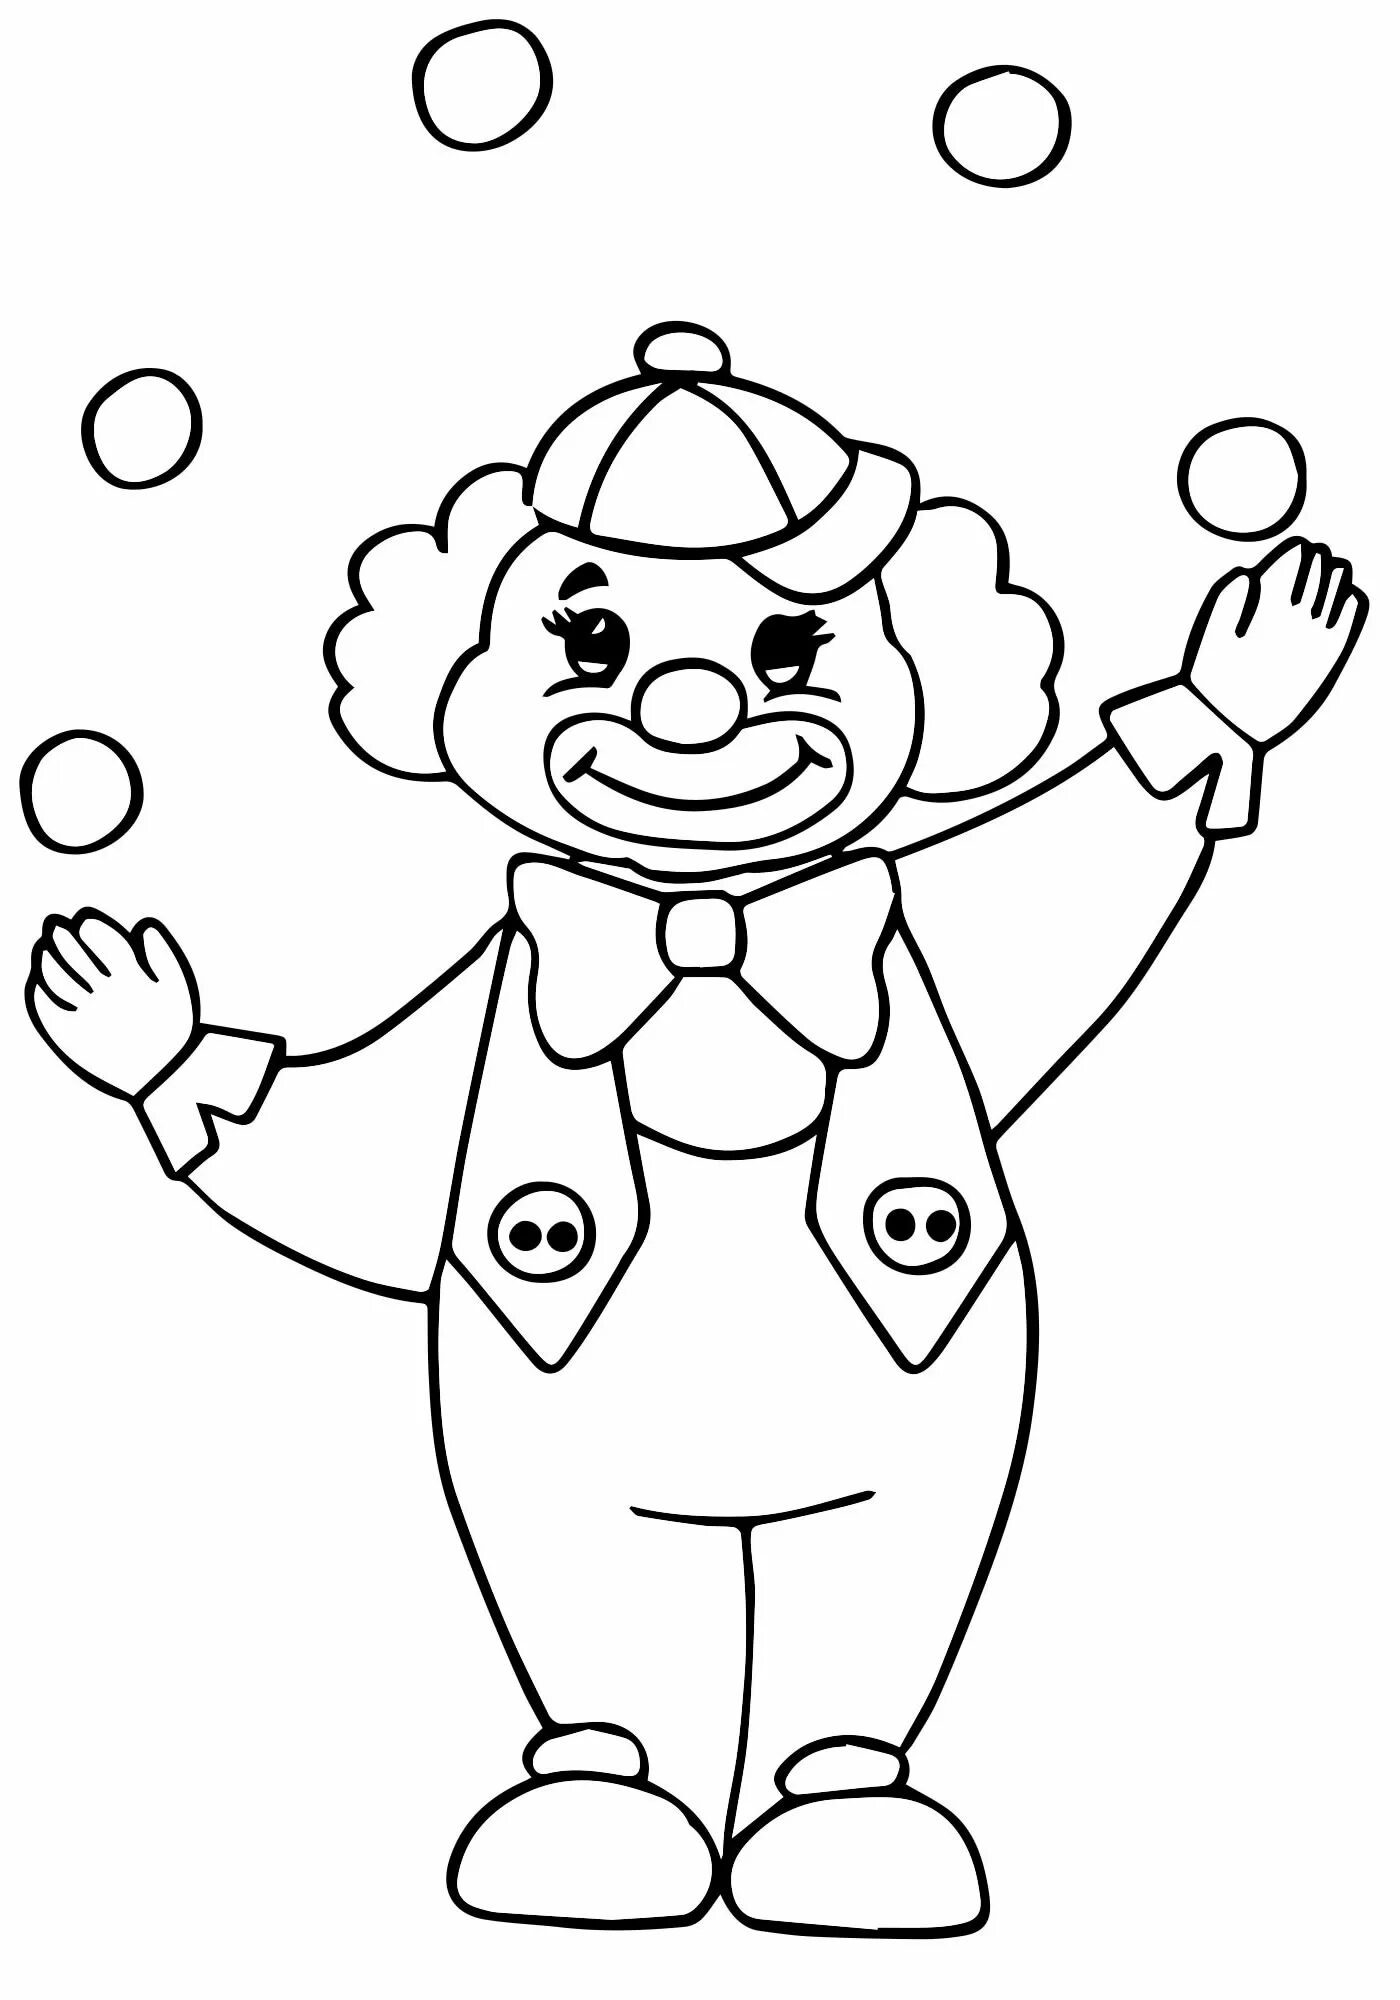 Clown drawing for kids for #2